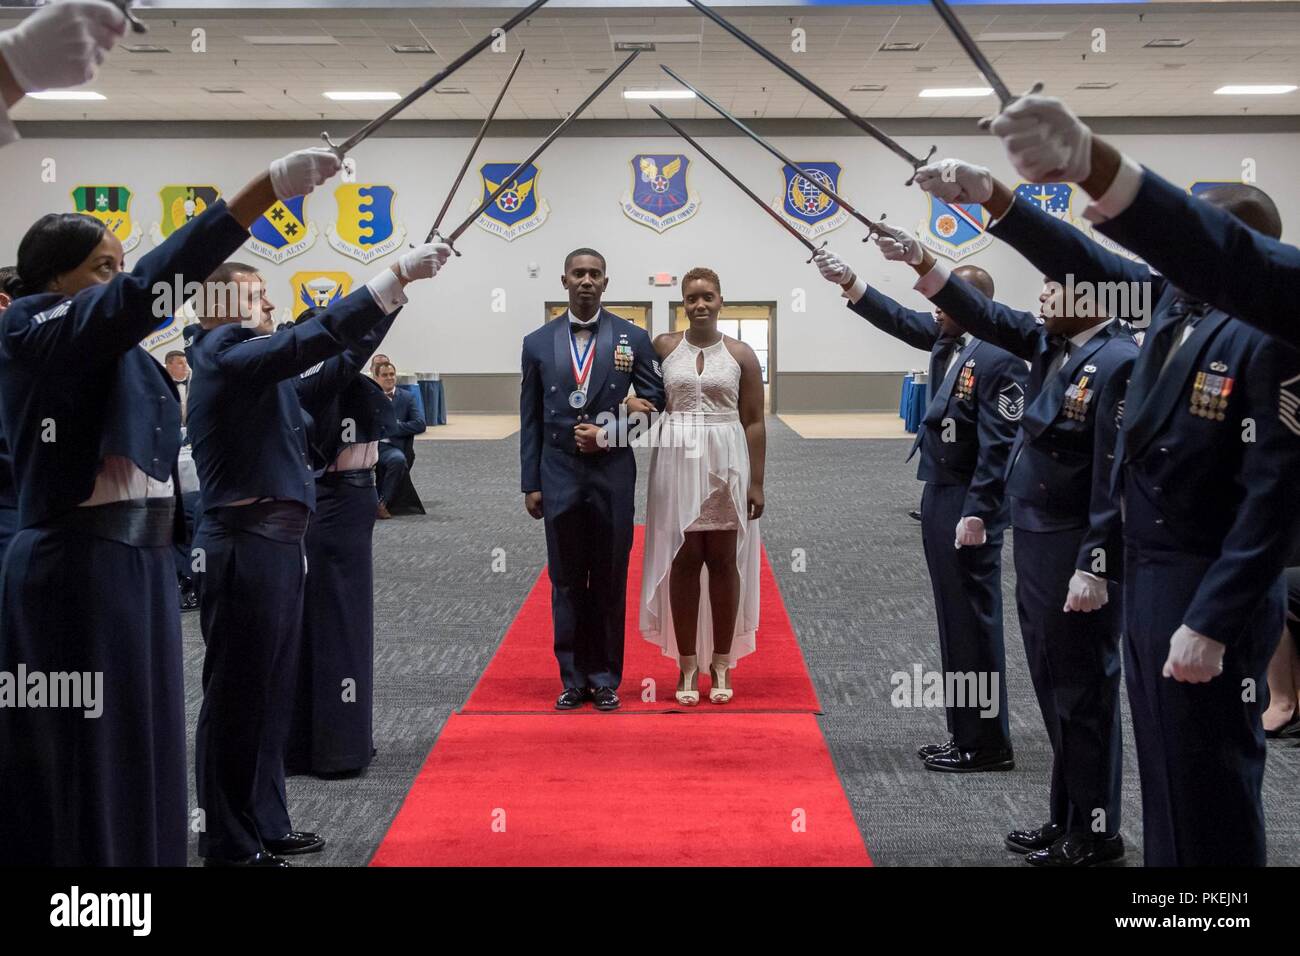 Technical sergeants celebrate their selction for master sergeant during a senior NCO induction ceremony at Barksdale Air Force Base, La., Aug. 10, 2018. Stock Photo